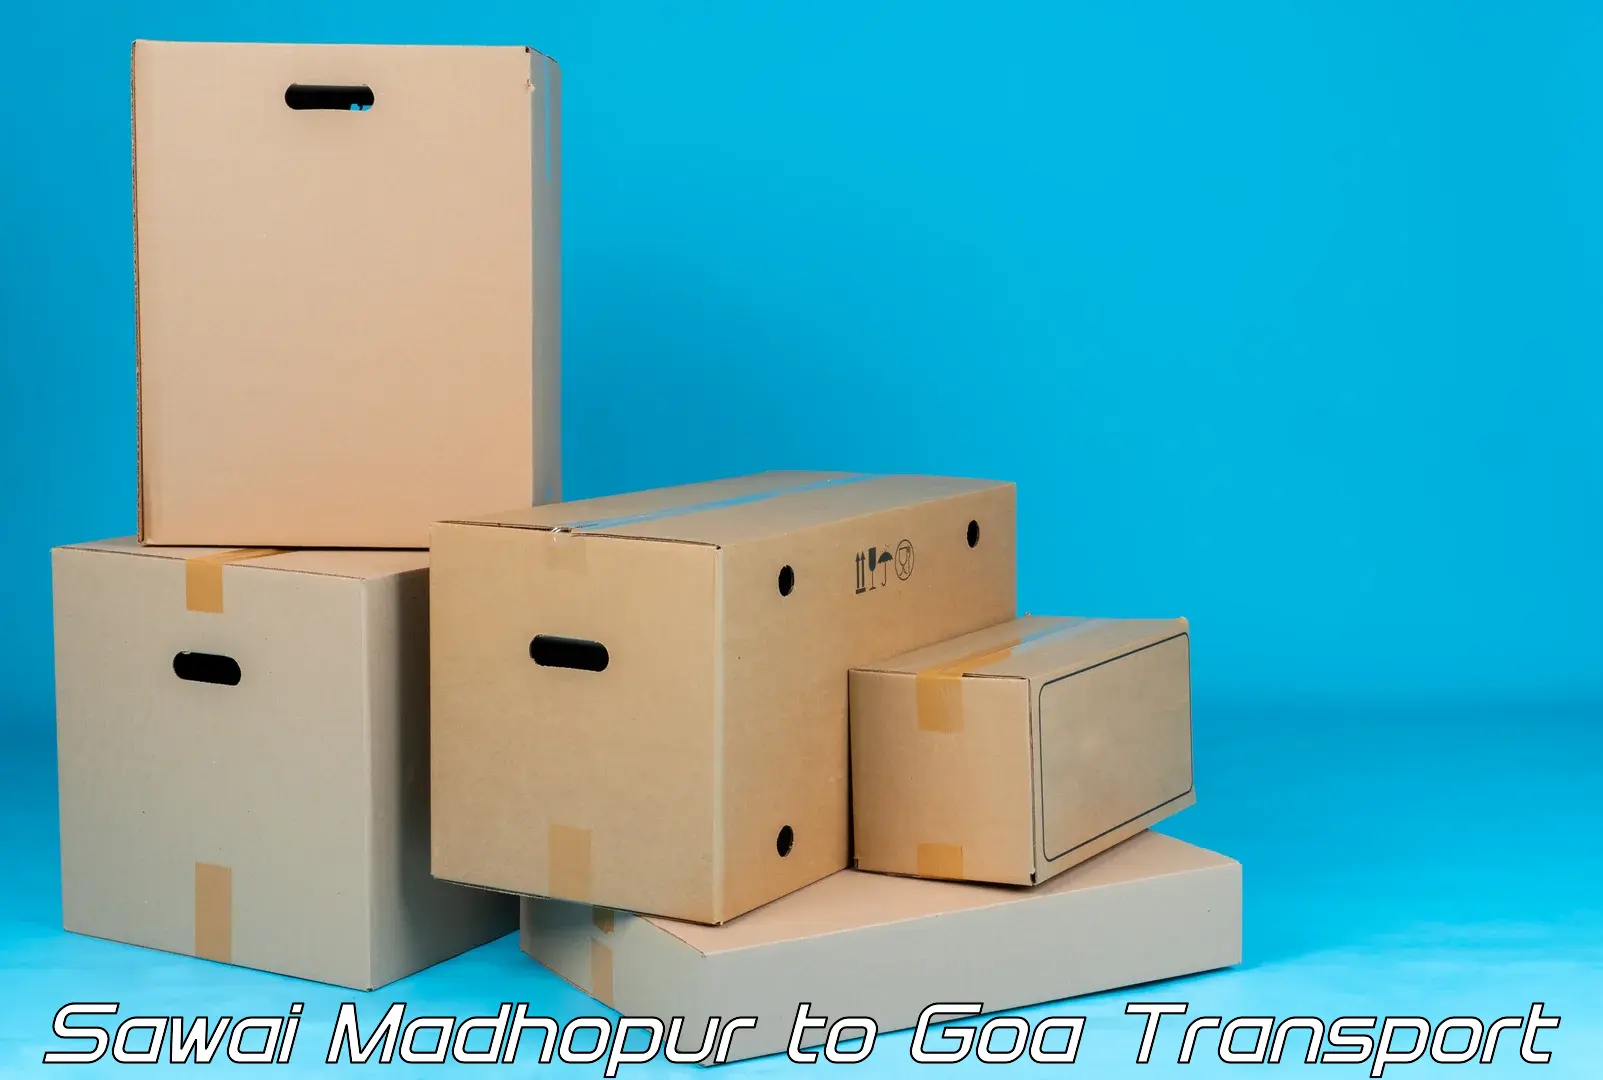 Container transport service Sawai Madhopur to Bardez